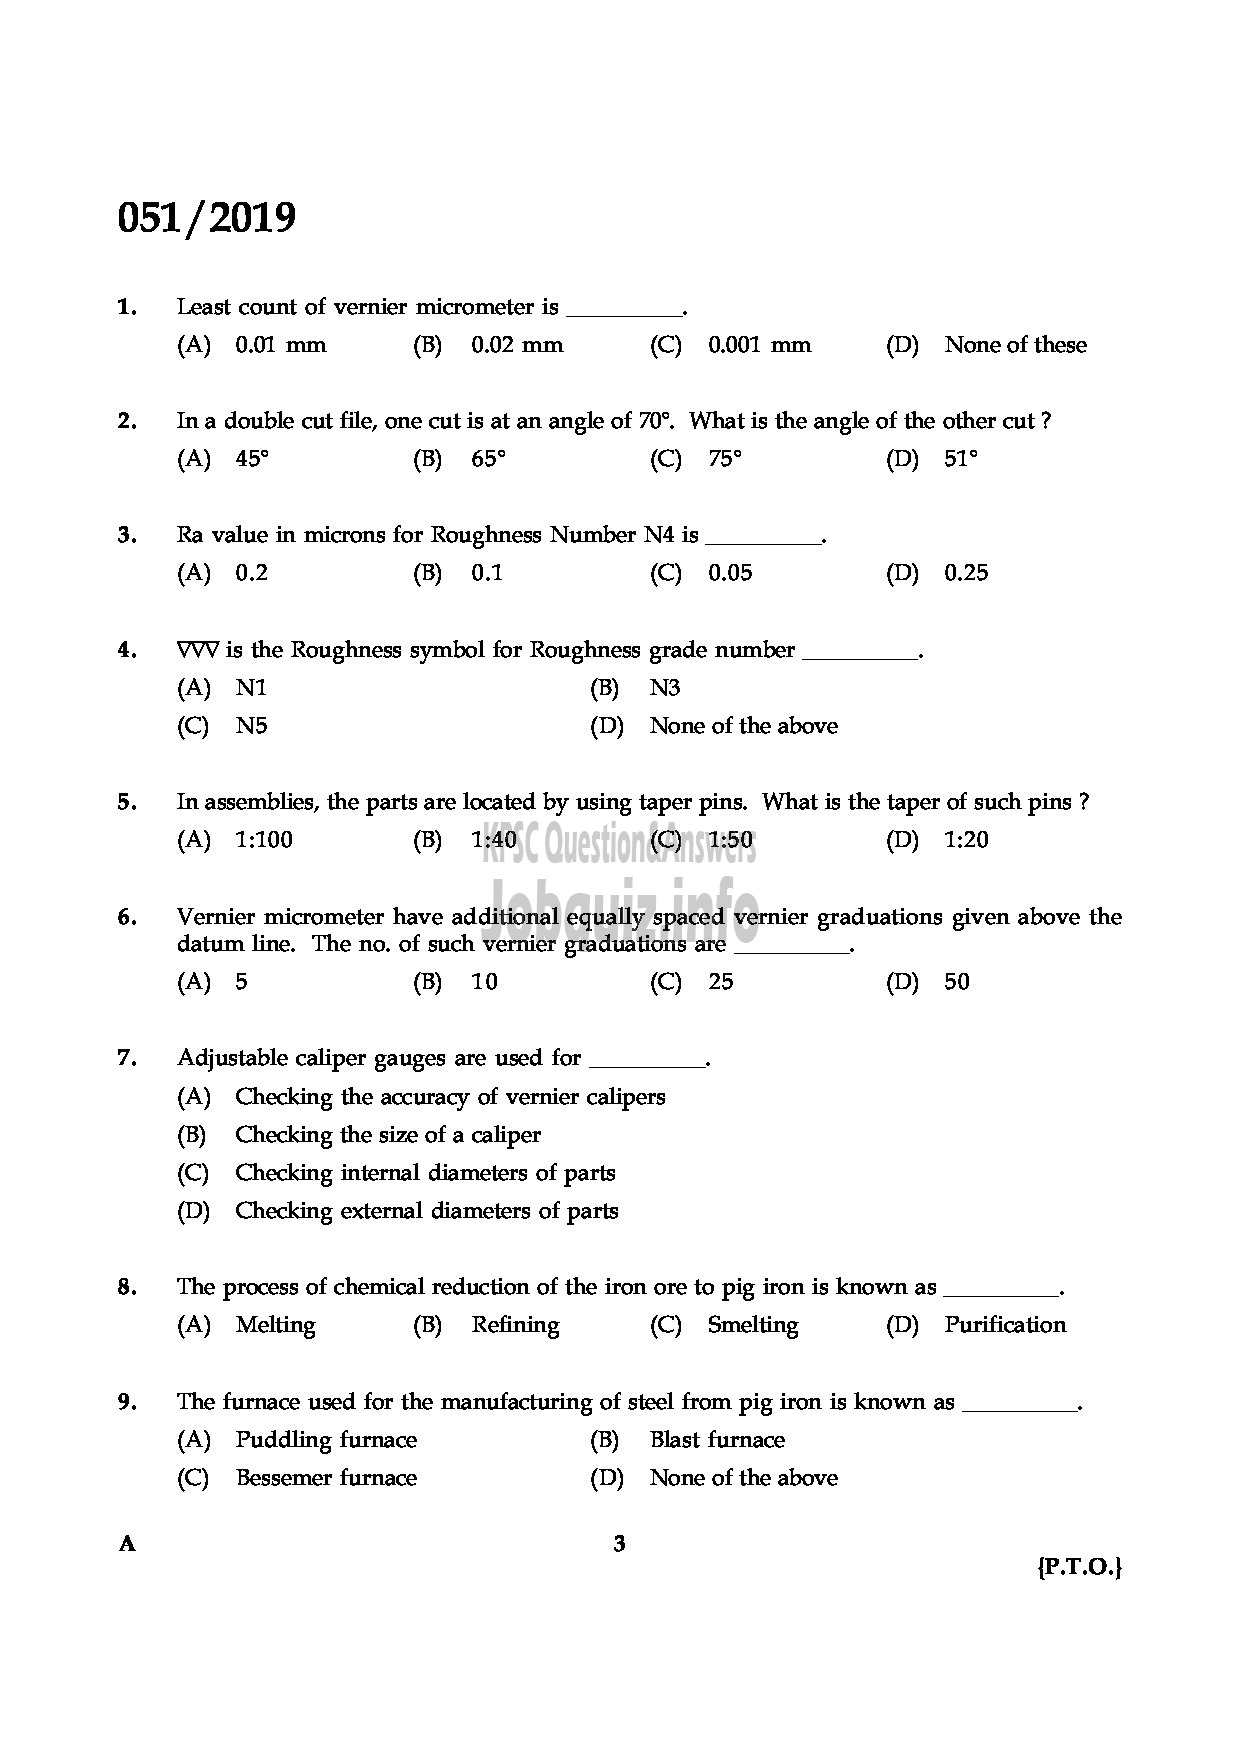 Kerala PSC Question Paper - JUNIOR INSTRUCTOR TOOL & DIE MAKER INDUSTRIAL TRAINING English -3